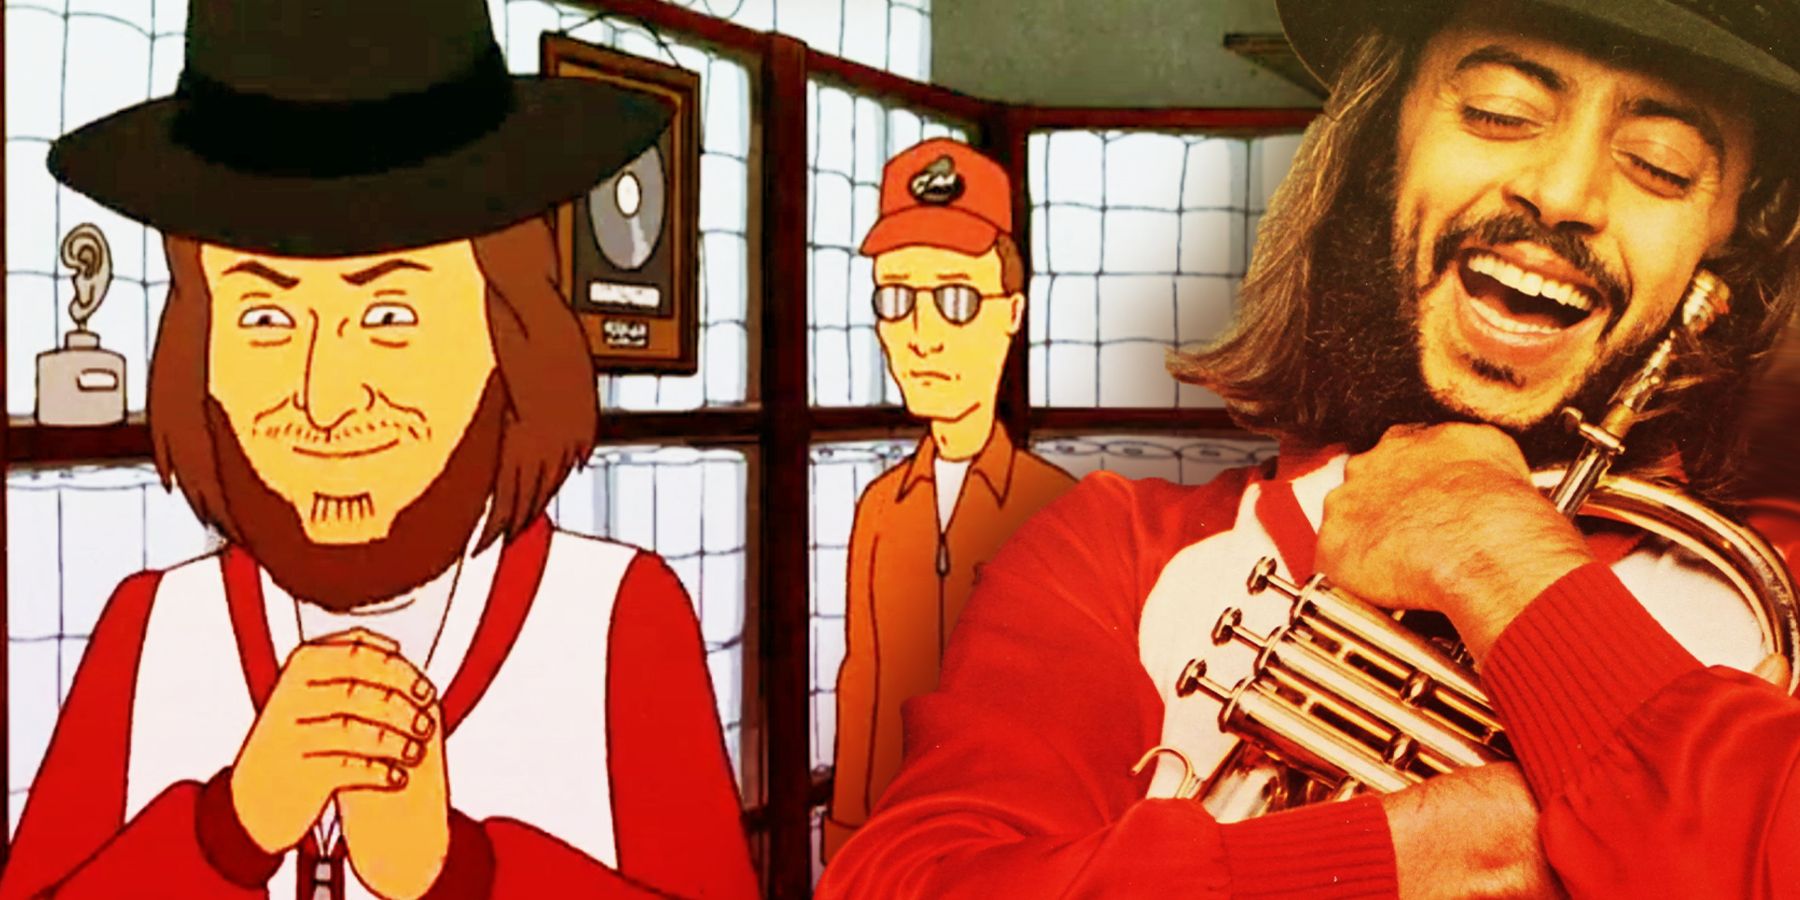 On the right, Chuck Mangione as portrayed in tv show 'King of the Hill' rubs his hands together and smiles as Dale looks on behind him. On the right,  Chuck Mangione from his album cover 'Feels So Good' smiles and hugs his trumpet.